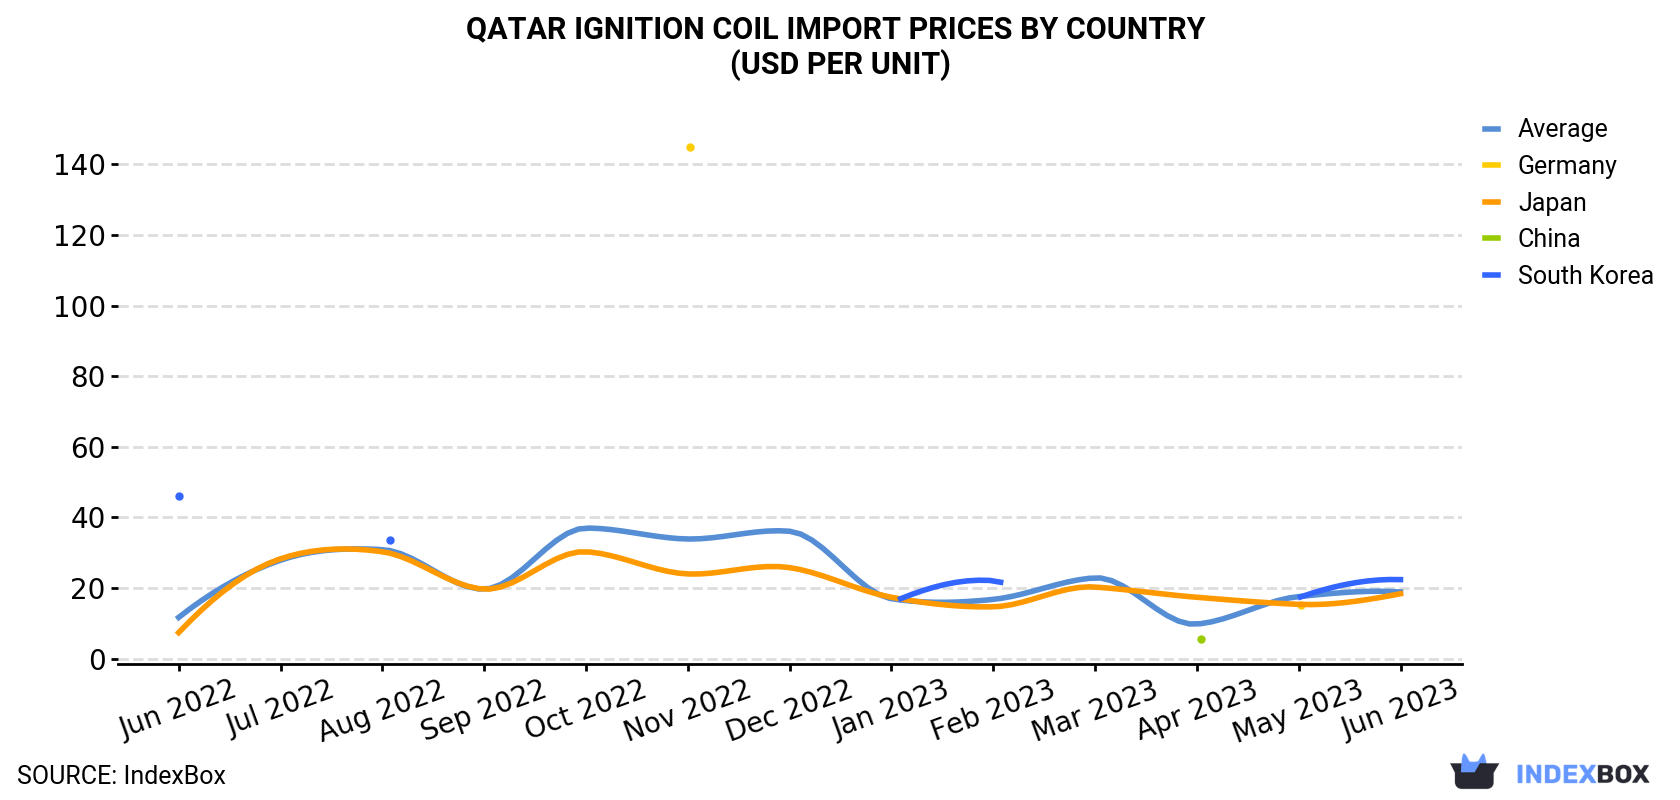 Qatar Ignition Coil Import Prices By Country (USD Per Unit)